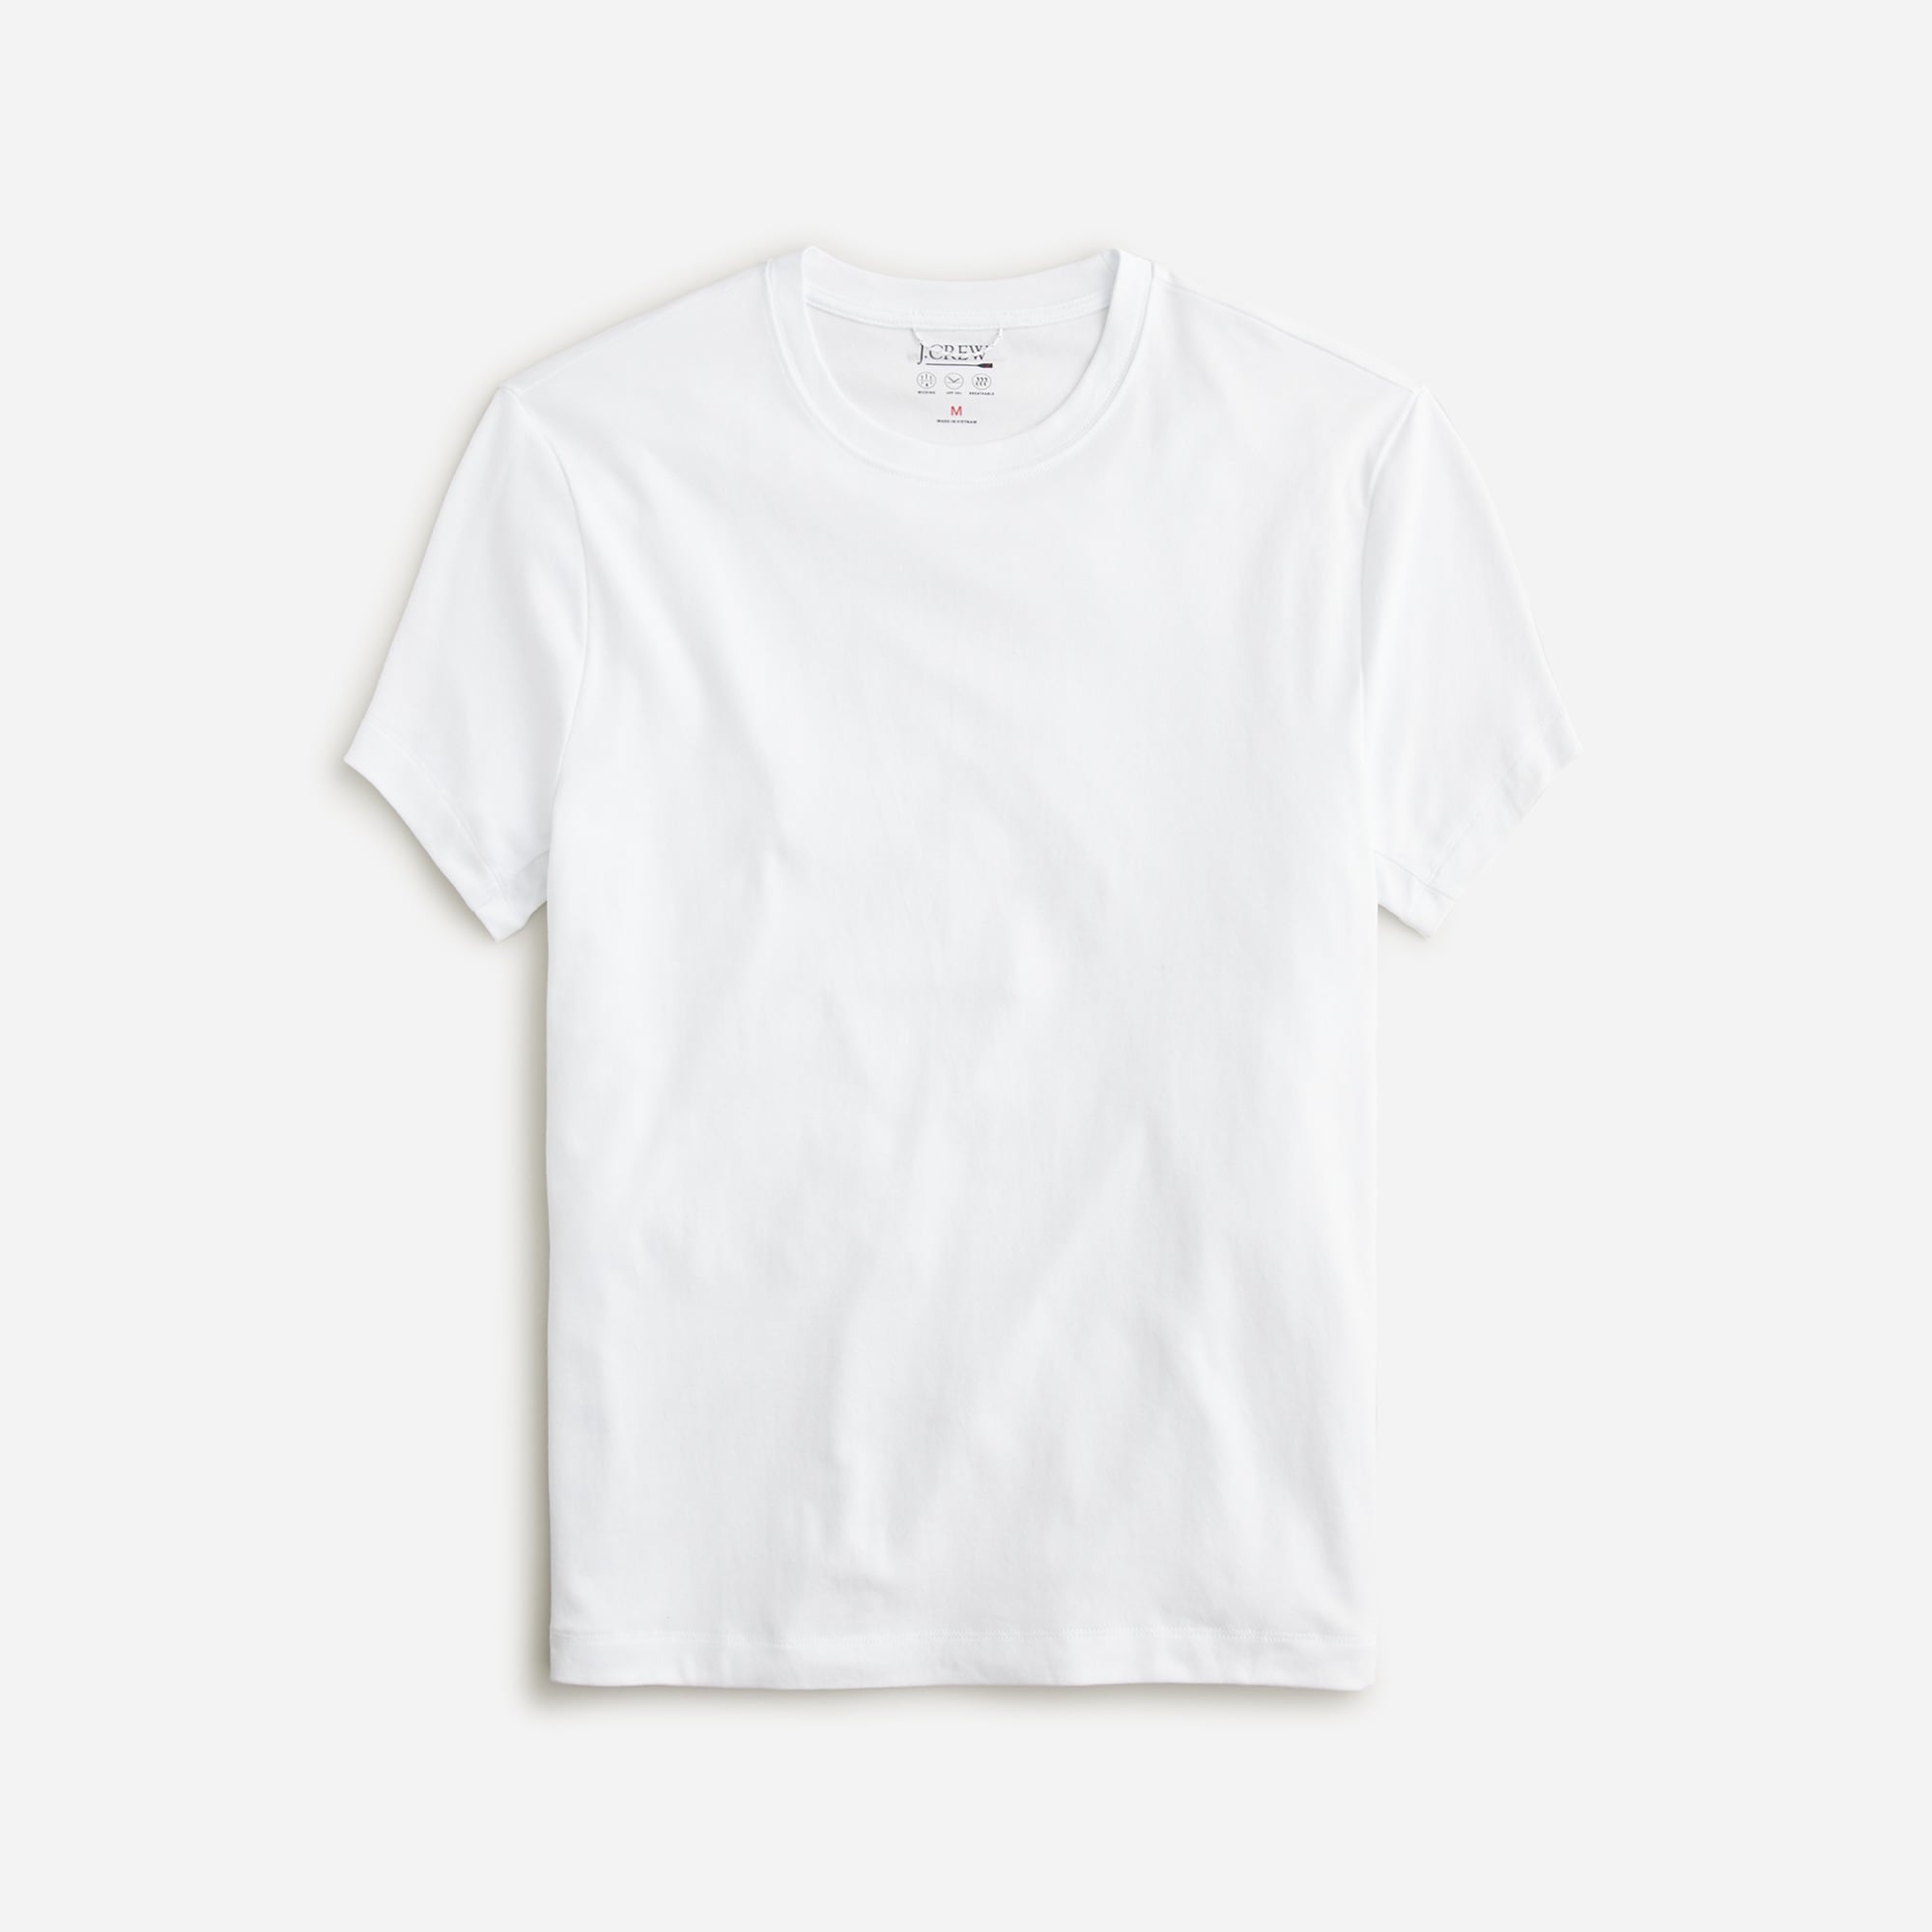 J.Crew Men's Performance T-Shirt with Coolmax Technology (Size X-Small)